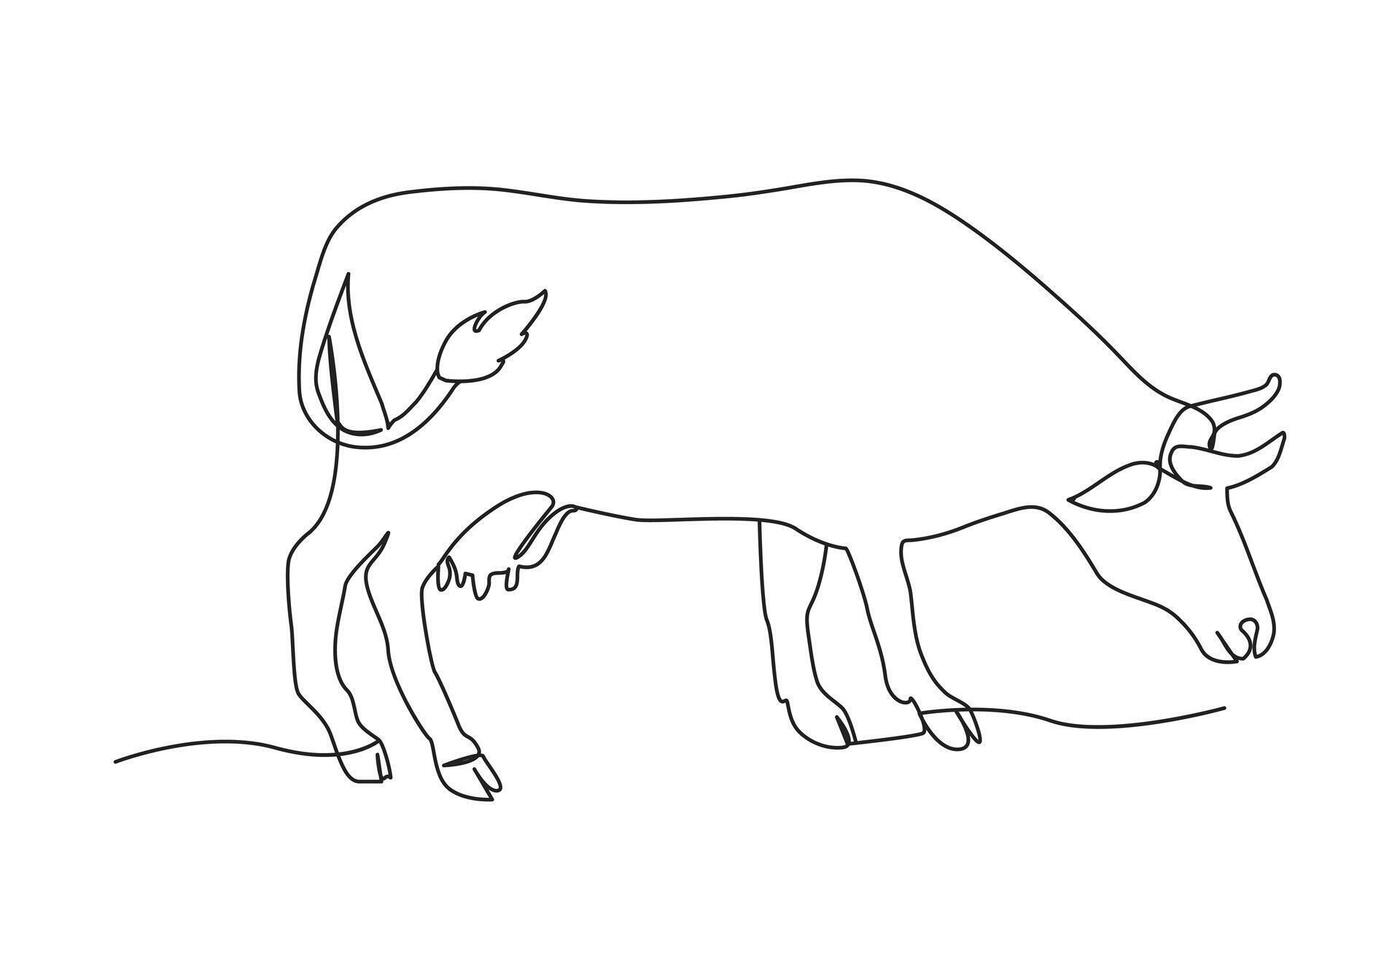 Cow in continuous line art drawing style. Beef single line. Household animals line art vector illustration.